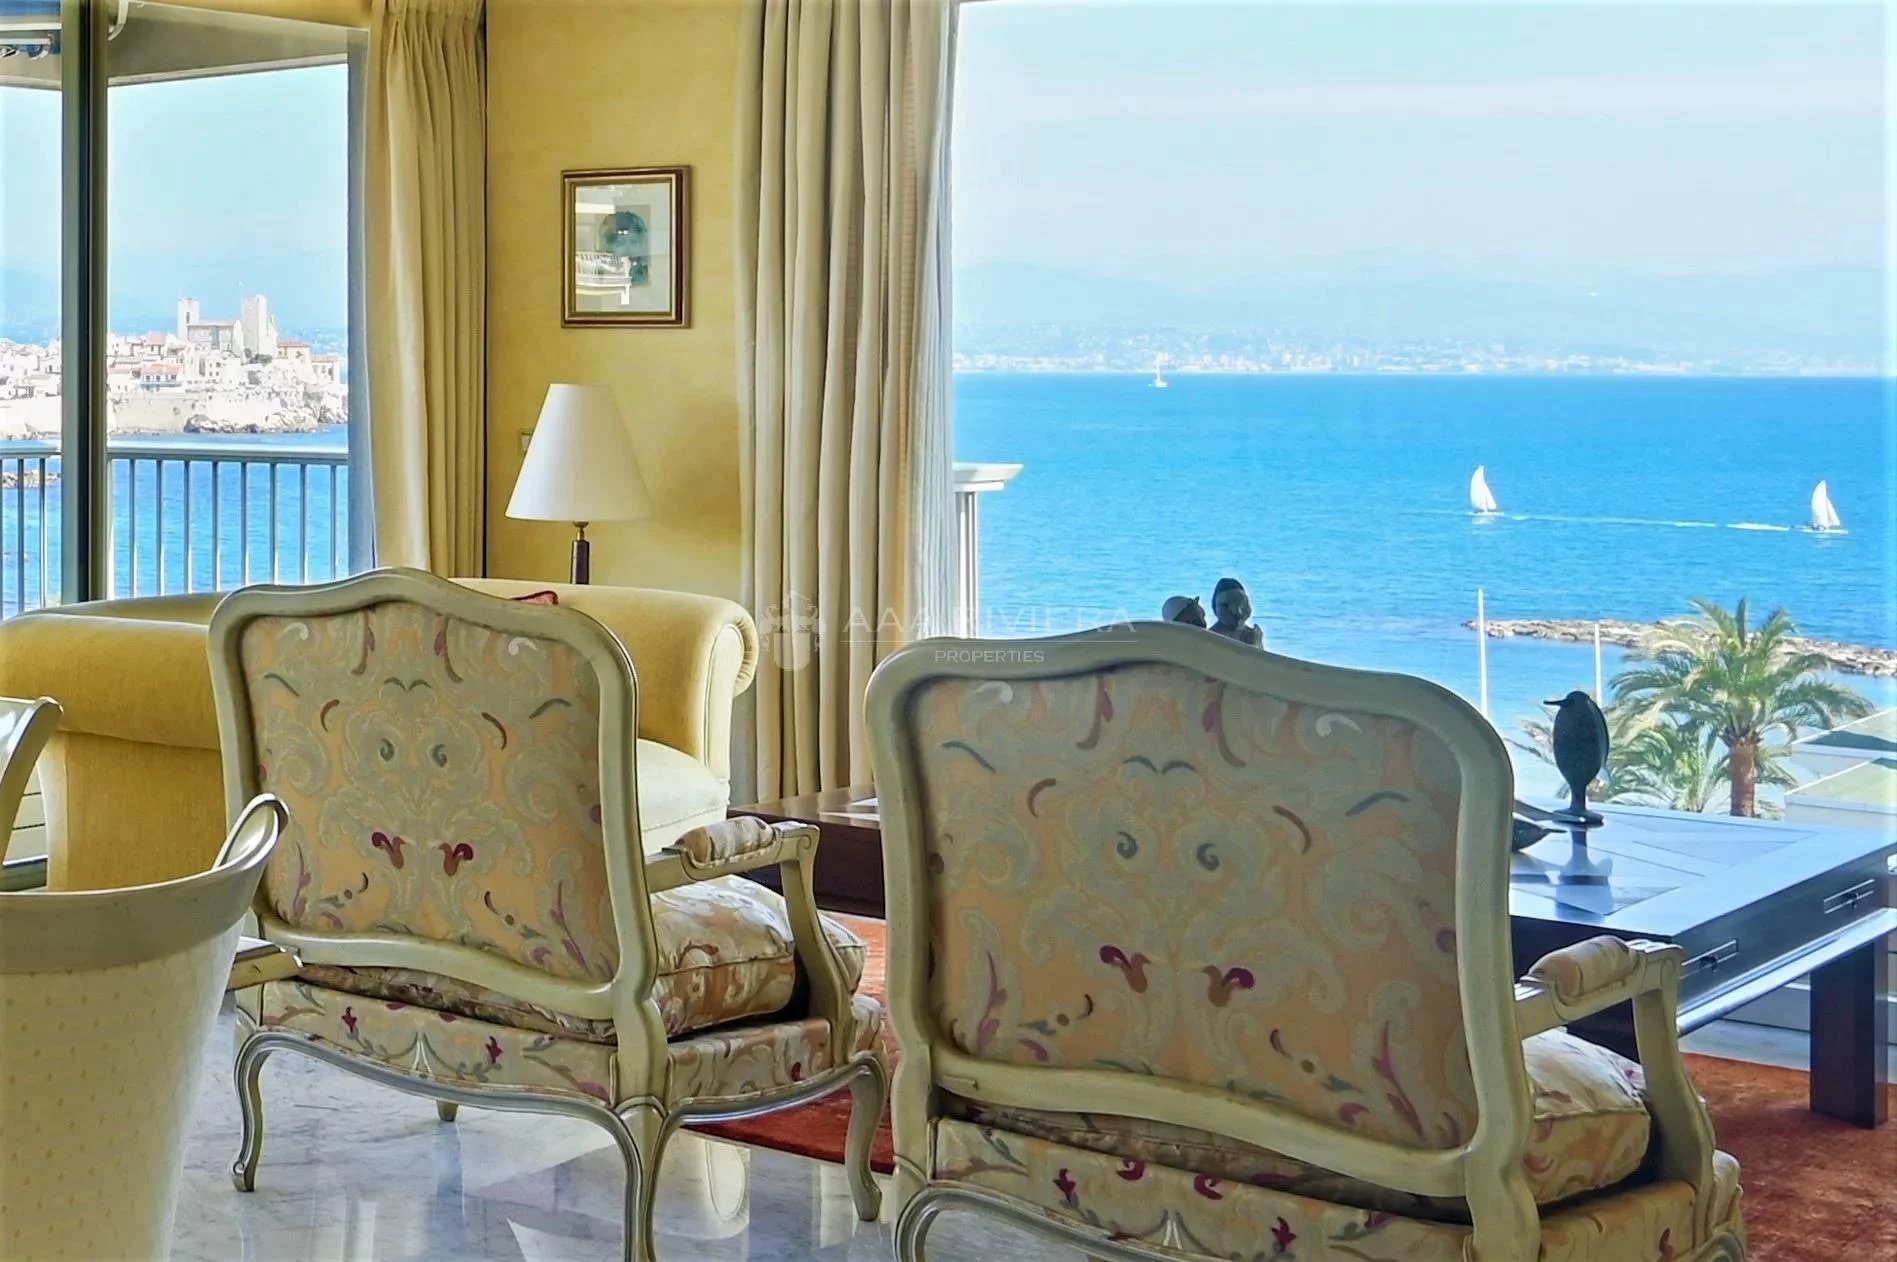 SOLD - ANTIBES Ilette - Joint Sole Agent - 3 bedroom high floor apartment with sea view. Garage, pool